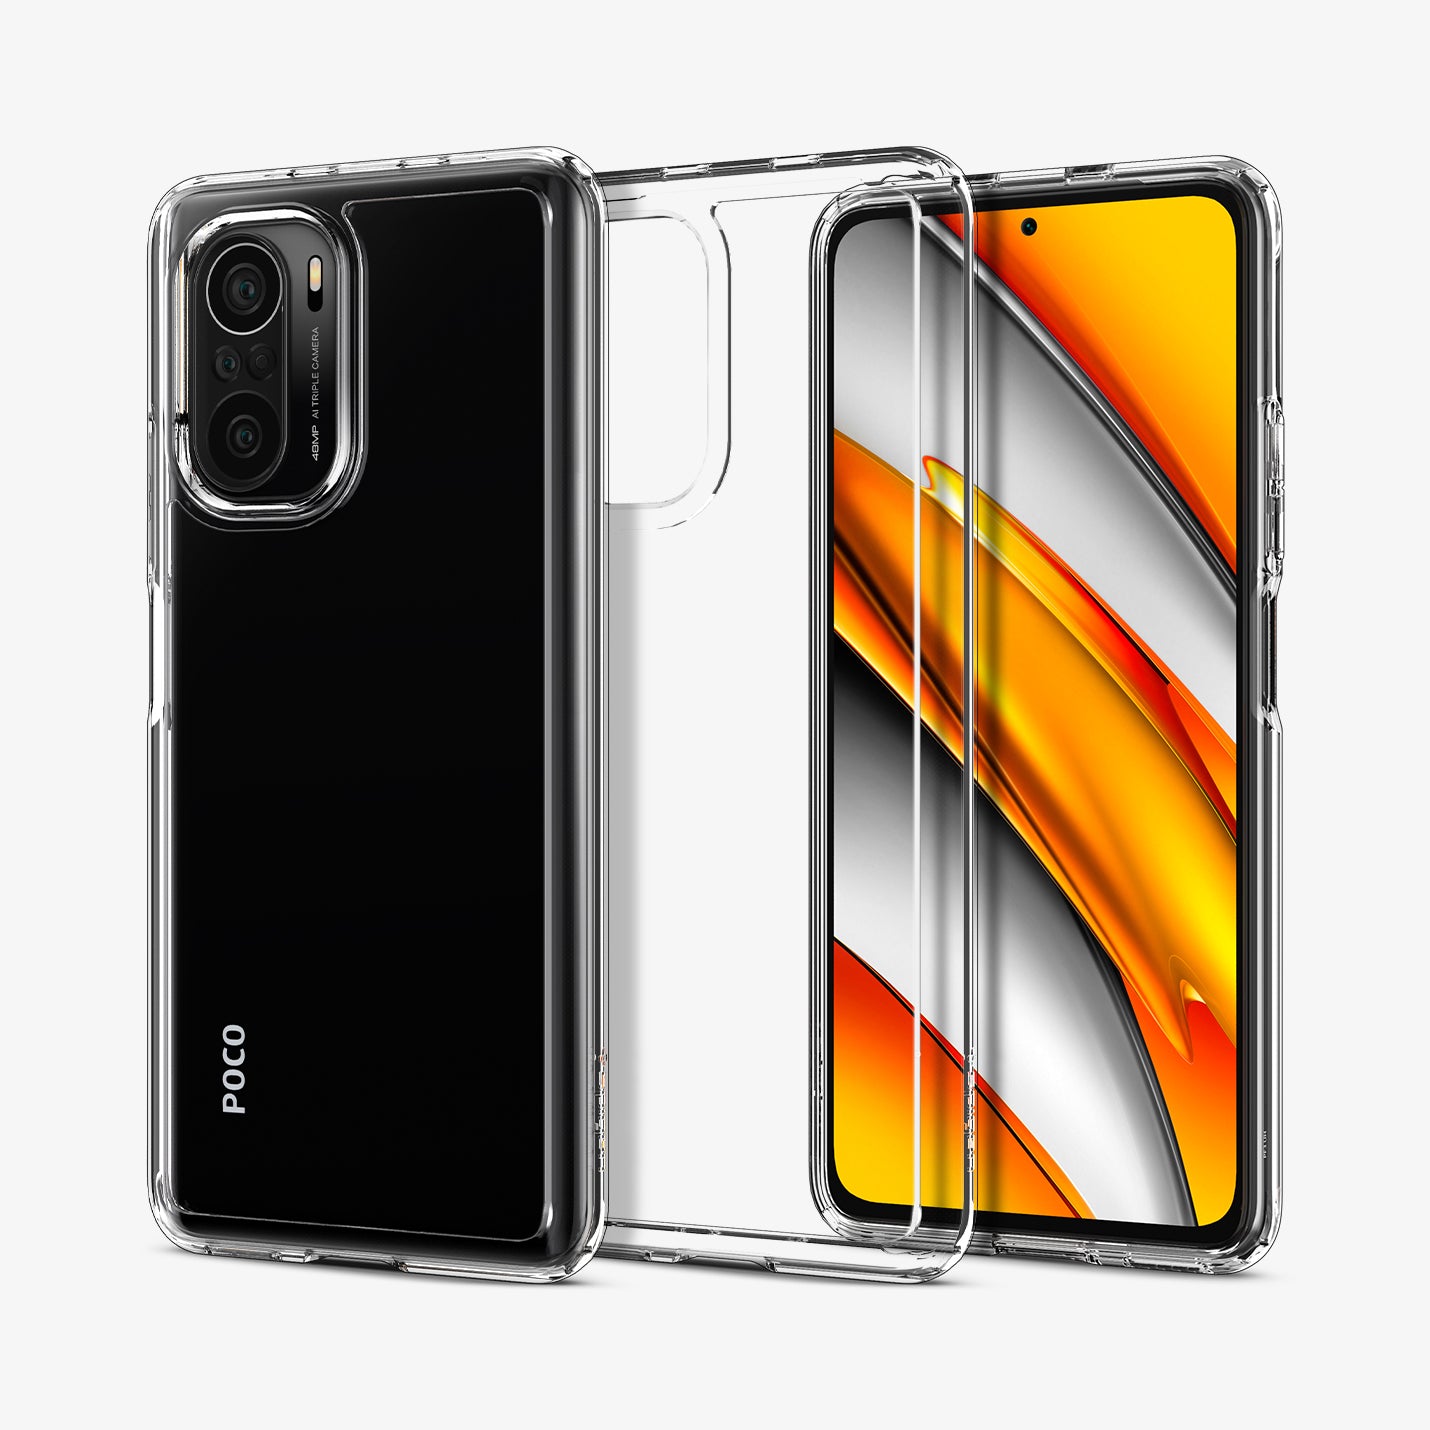 ACS03142 - Xiaomi POCO F3 Ultra Hybrid Case in Crystal Clear showing the back, back of transparent case, and the front paralleled with each other